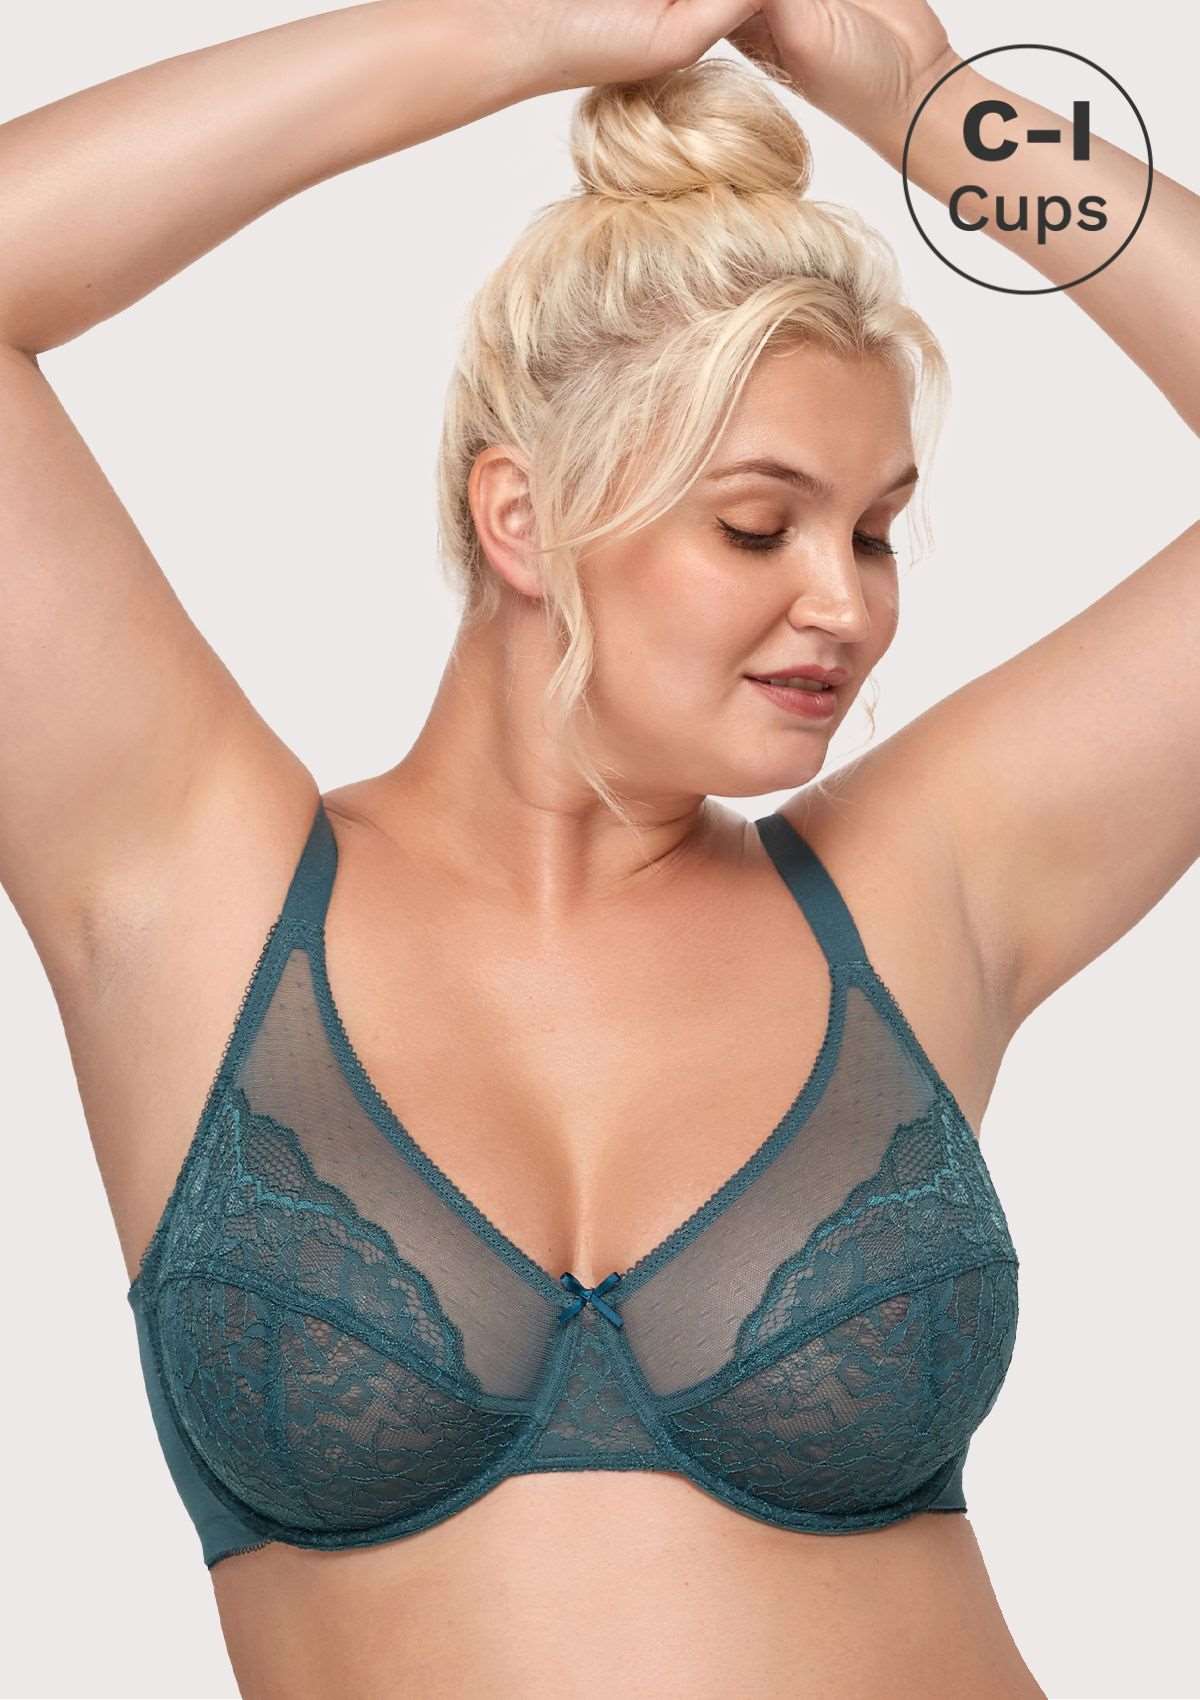 HSIA Enchante Full Coverage Bra: Supportive Bra For Big Busts - Royal Blue / 34 / D